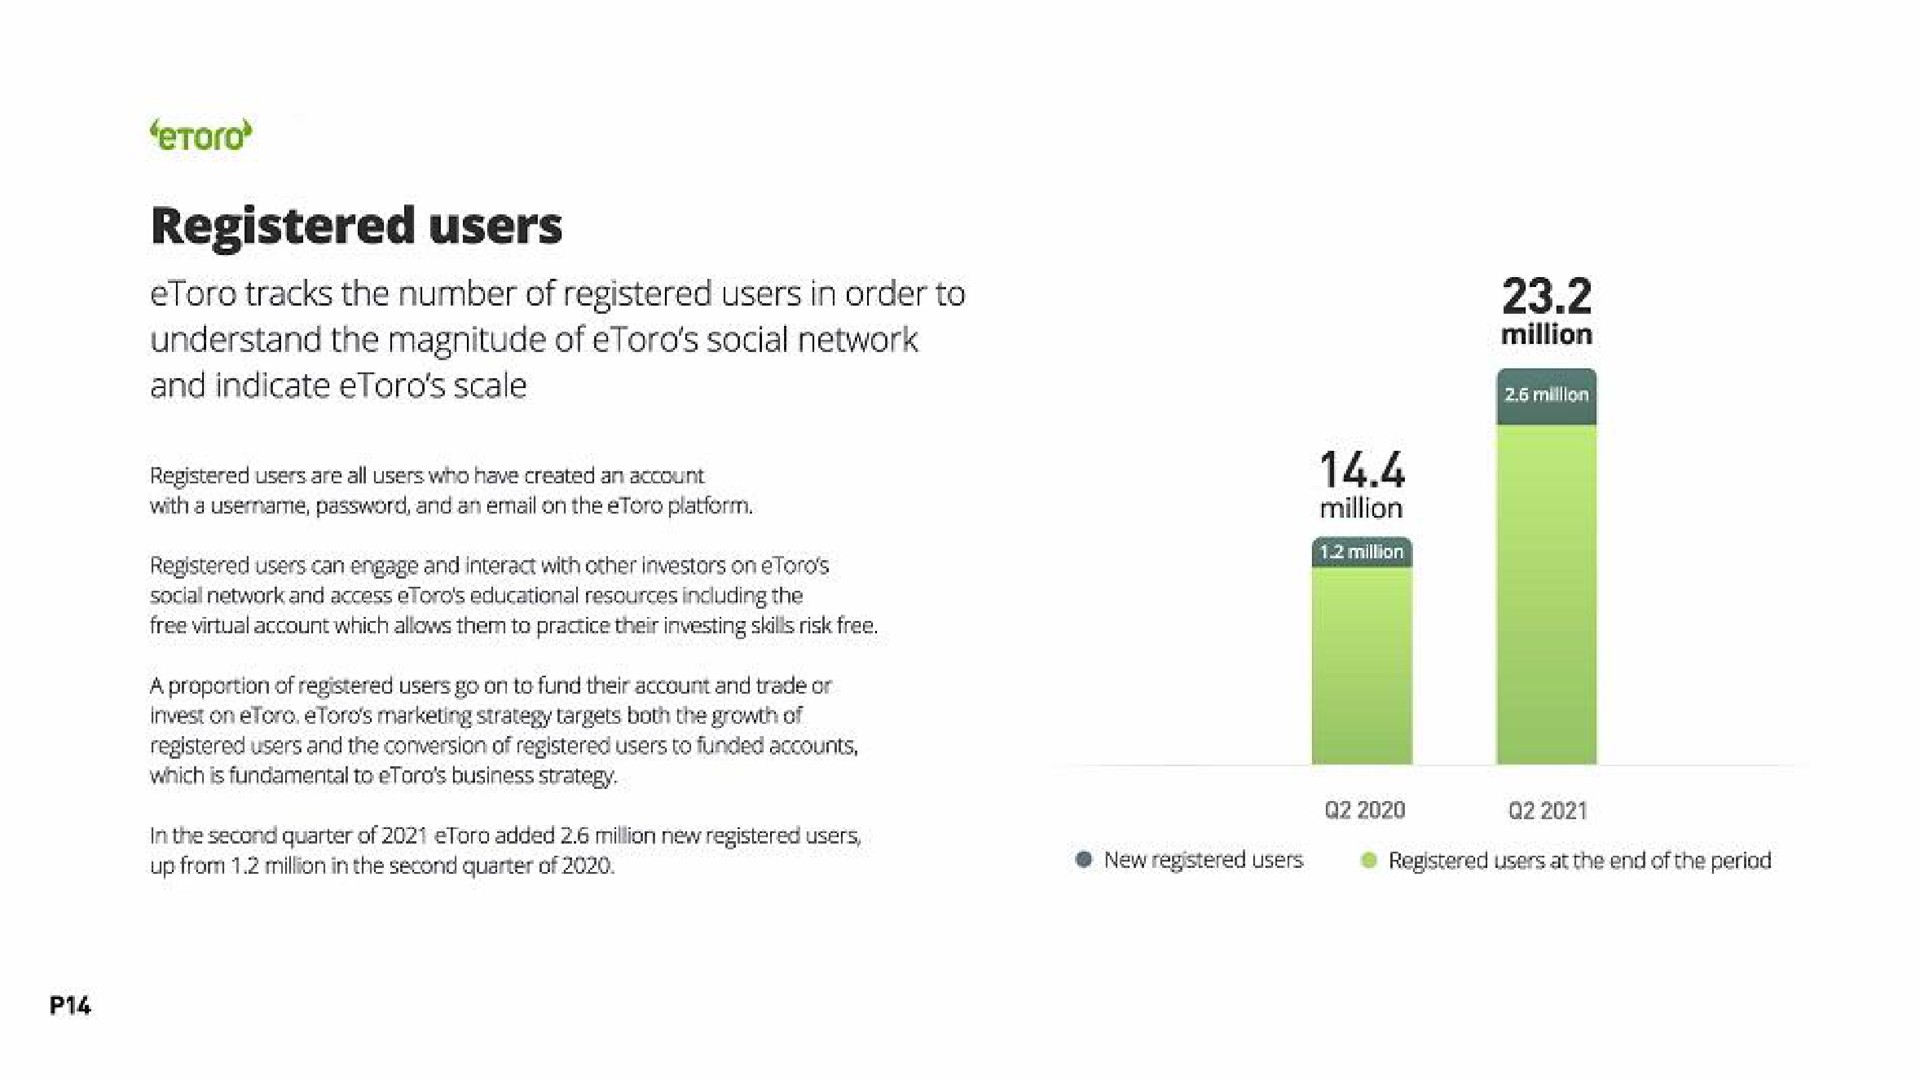 registered users tracks the number of registered users in order to understand the magnitude of social network and indicate scale pis | eToro